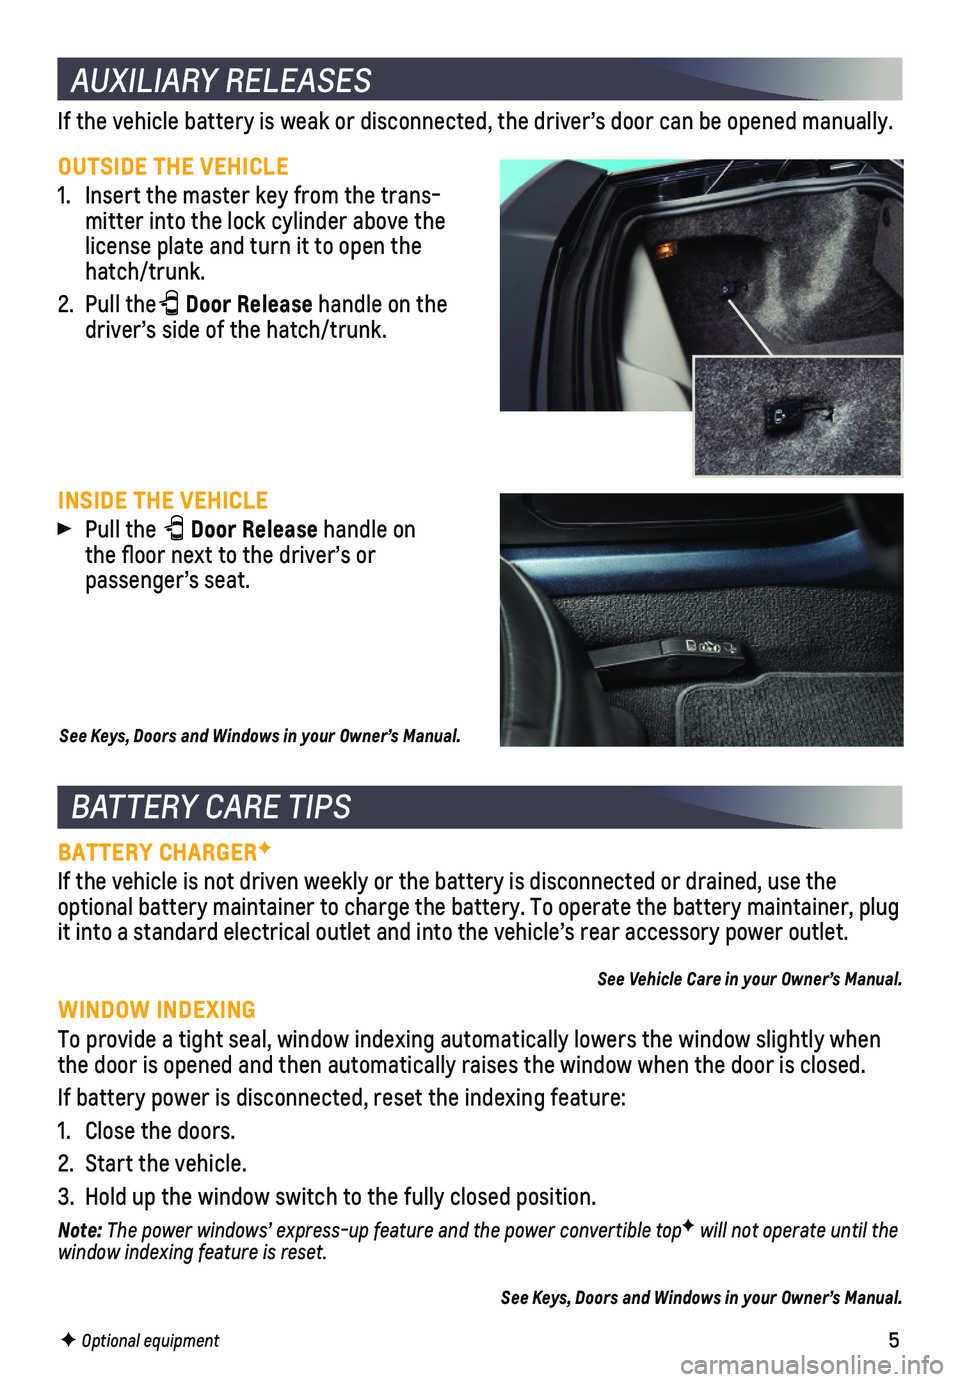 CHEVROLET CORVETTE 2018  Get To Know Guide 5
AUXILIARY RELEASES
OUTSIDE THE VEHICLE
1. Insert the master key from the trans-mitter into the lock   cylinder above the license plate and turn it to open the hatch/trunk.
2. Pull the Door Release h